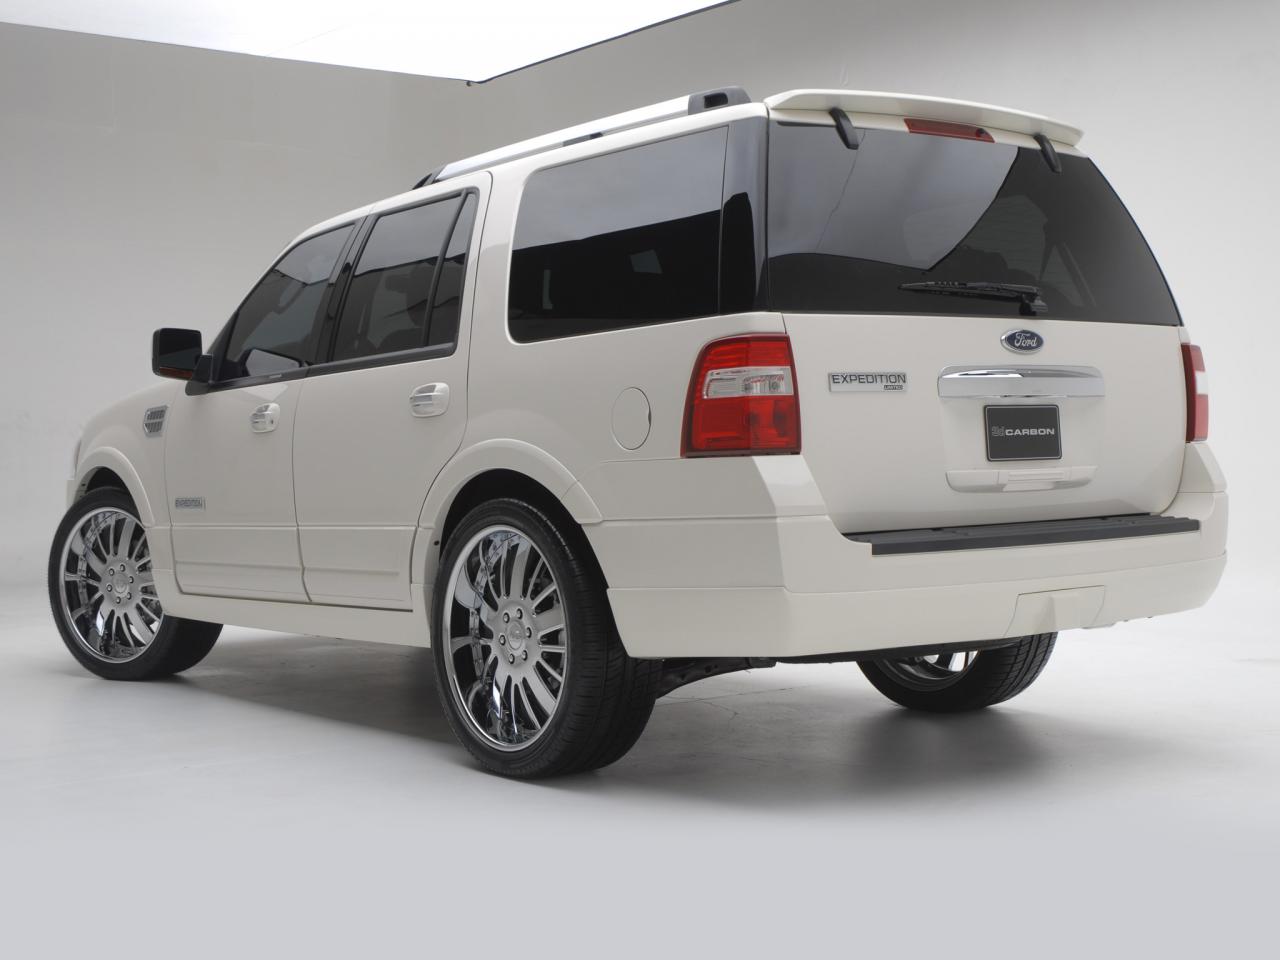 обои Ford Expedition Urban Rider Styling Kit by 3dCarbon 2007 зад фото